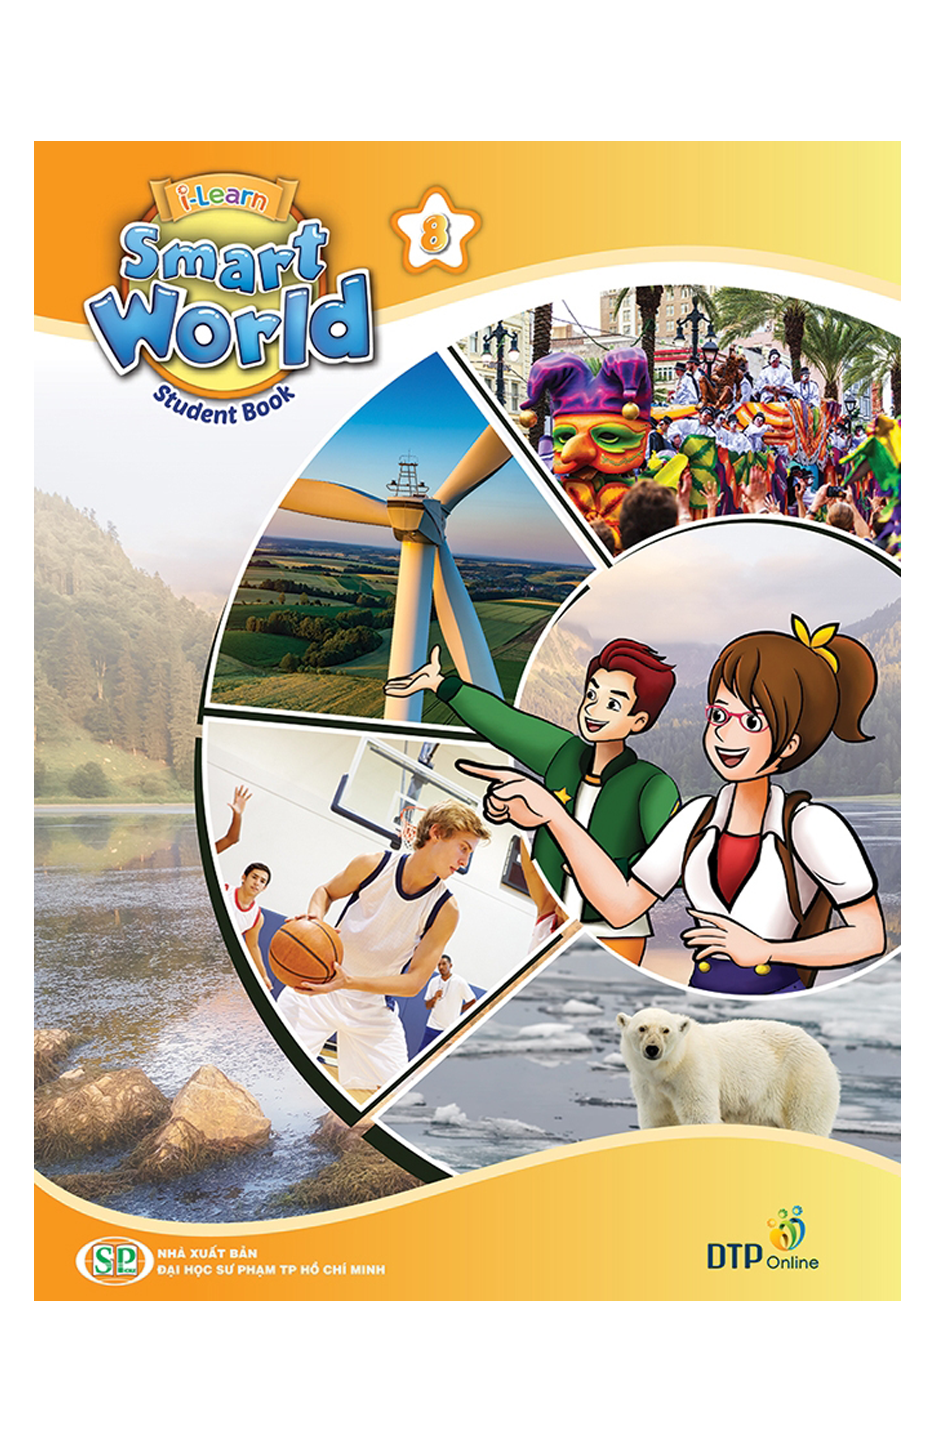 I-learn Smart World 8 Students Book.